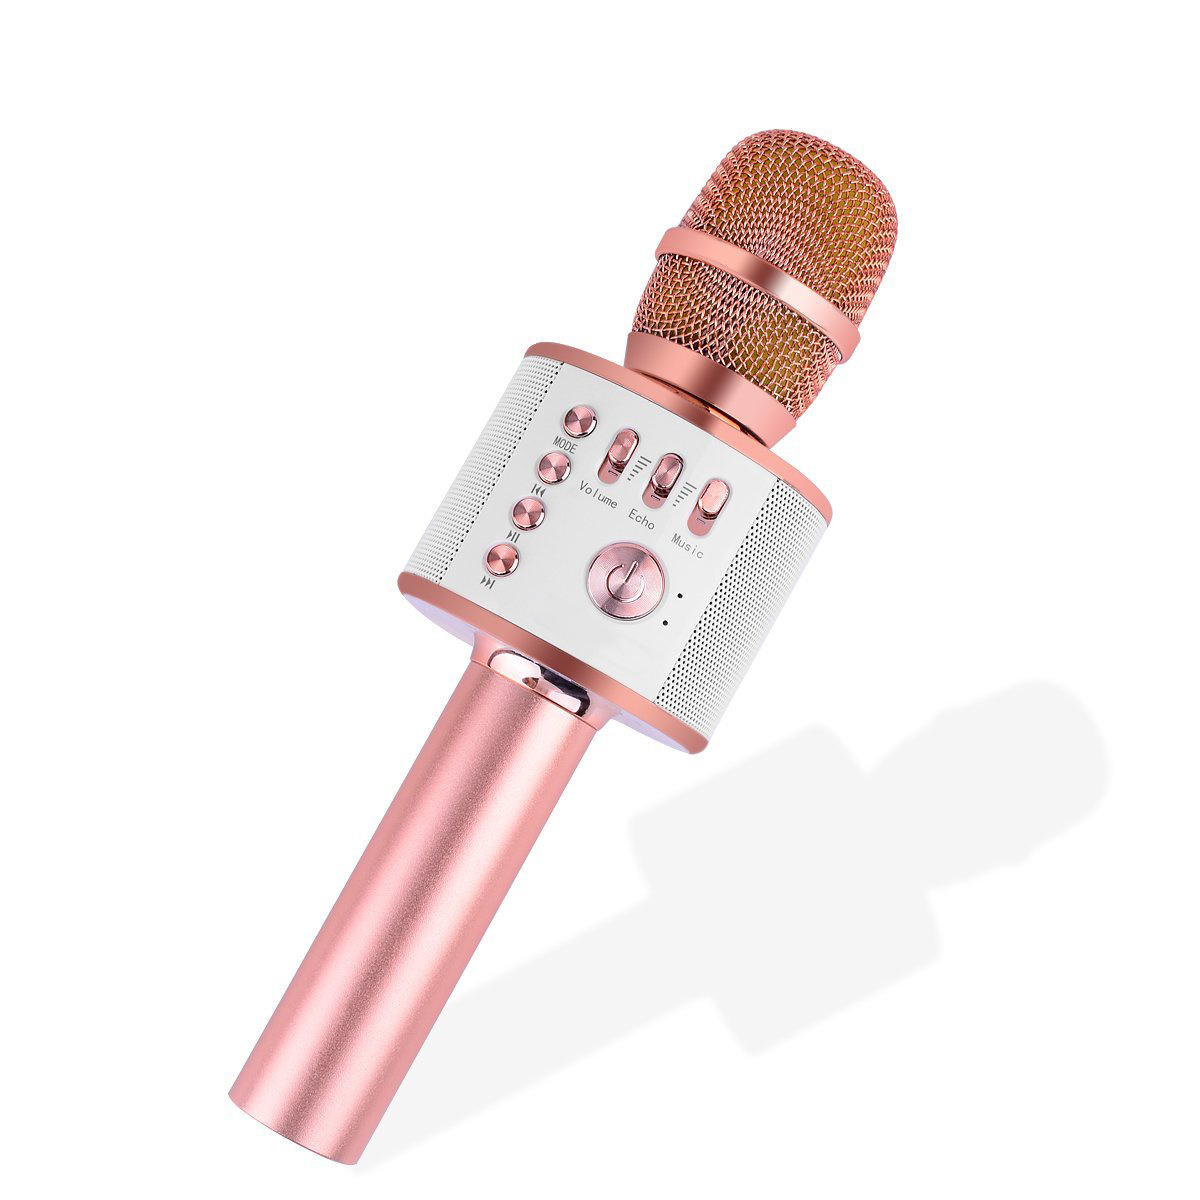 Portable Microphone and Speaker for Smule Yokee Starmaker Live Stream